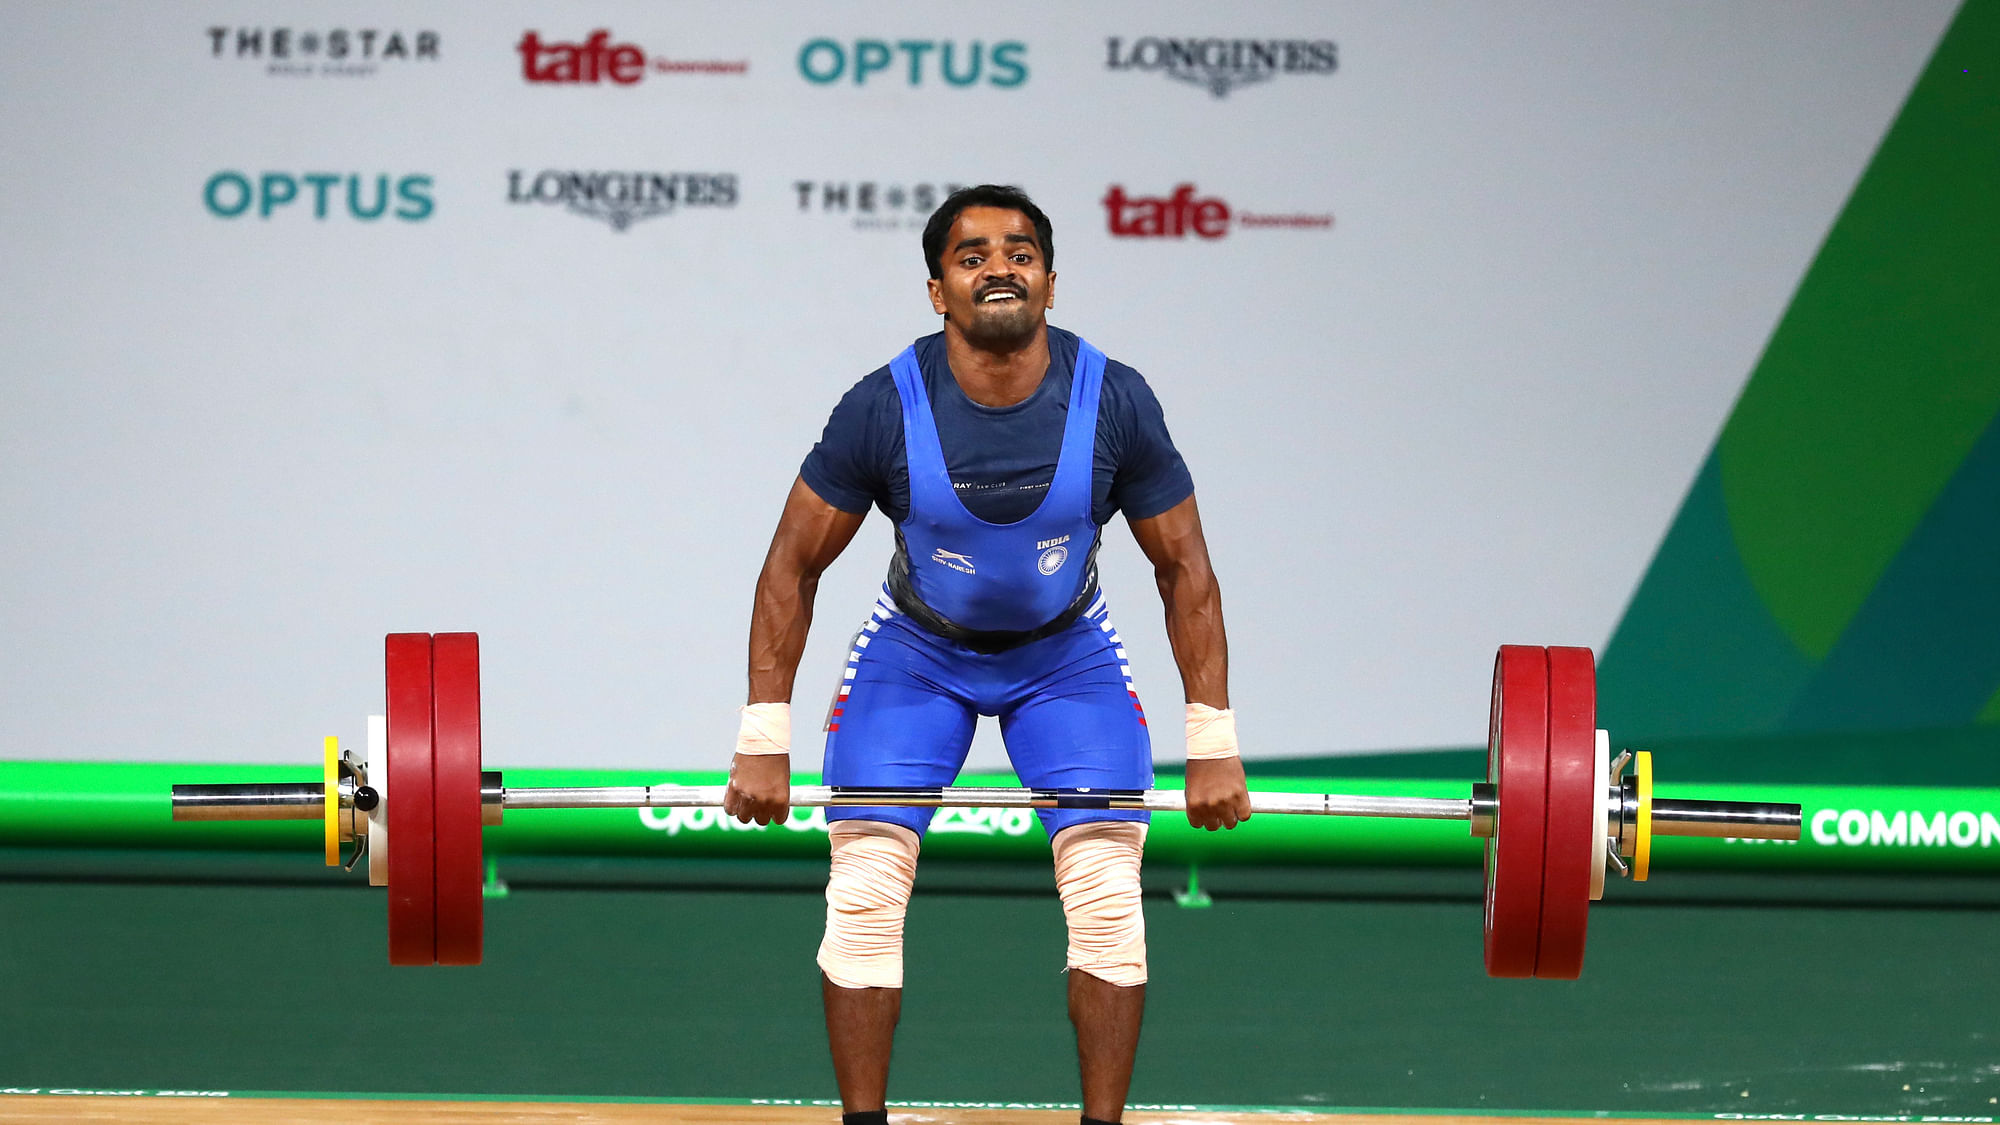 India’s Gururaja competes in Men’s 56kg Weightlifting at Commonwealth Games in Gold Coast, Australia.